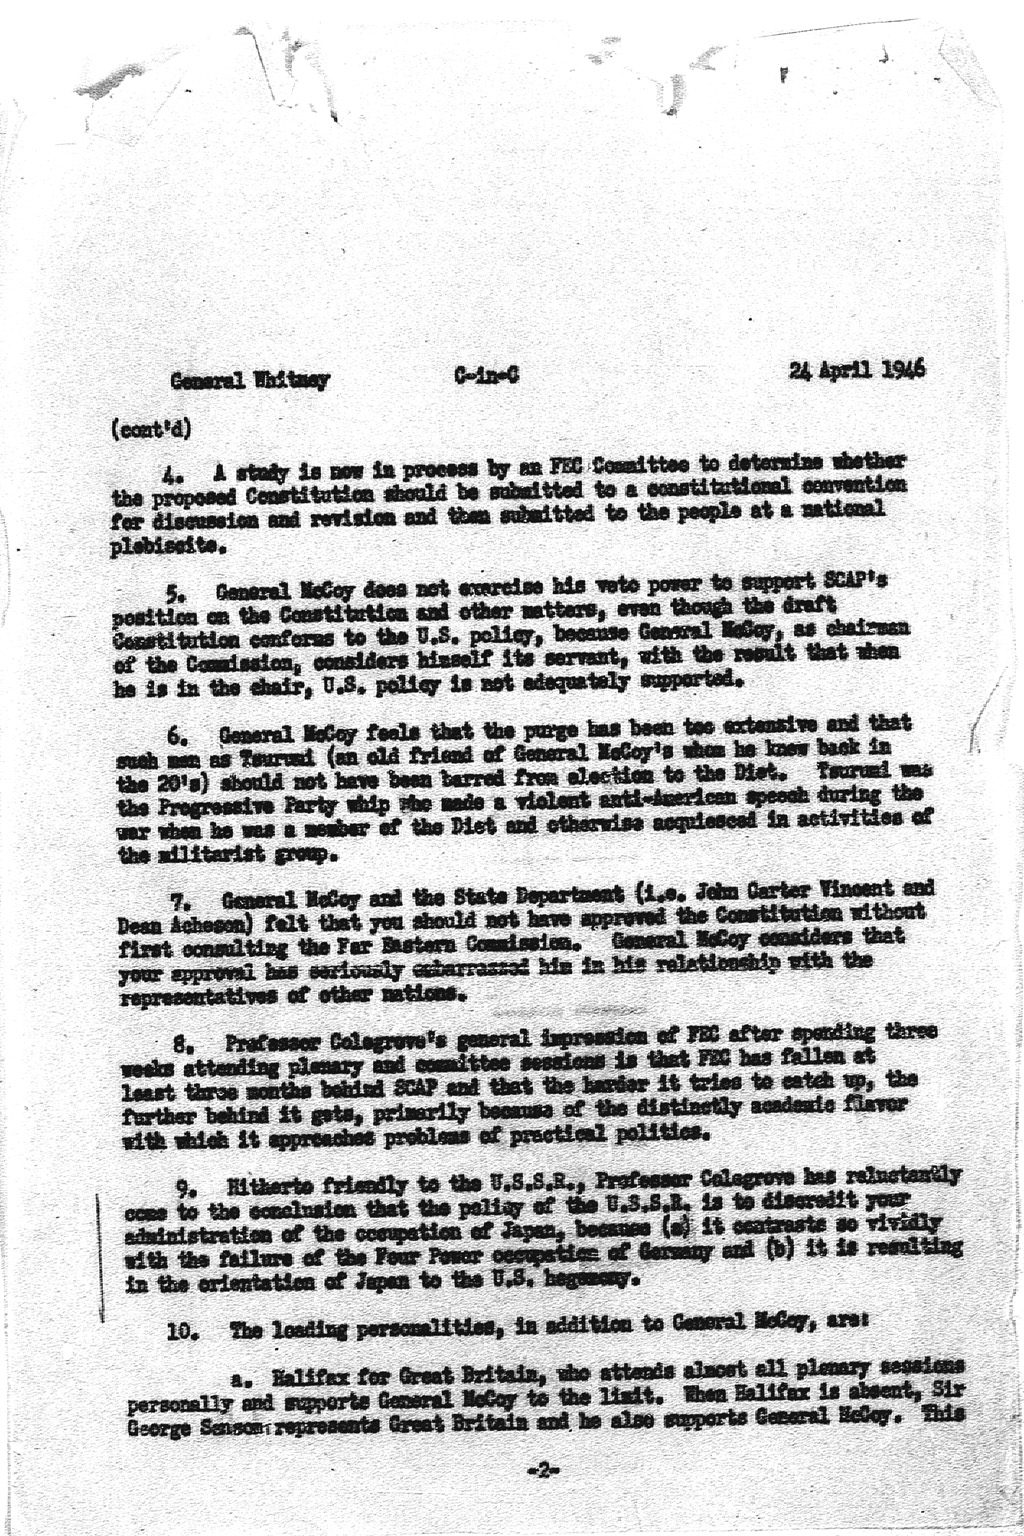 [From] General Whitney [to] C-in-C, dated 24 April 1946 [re discussion ...